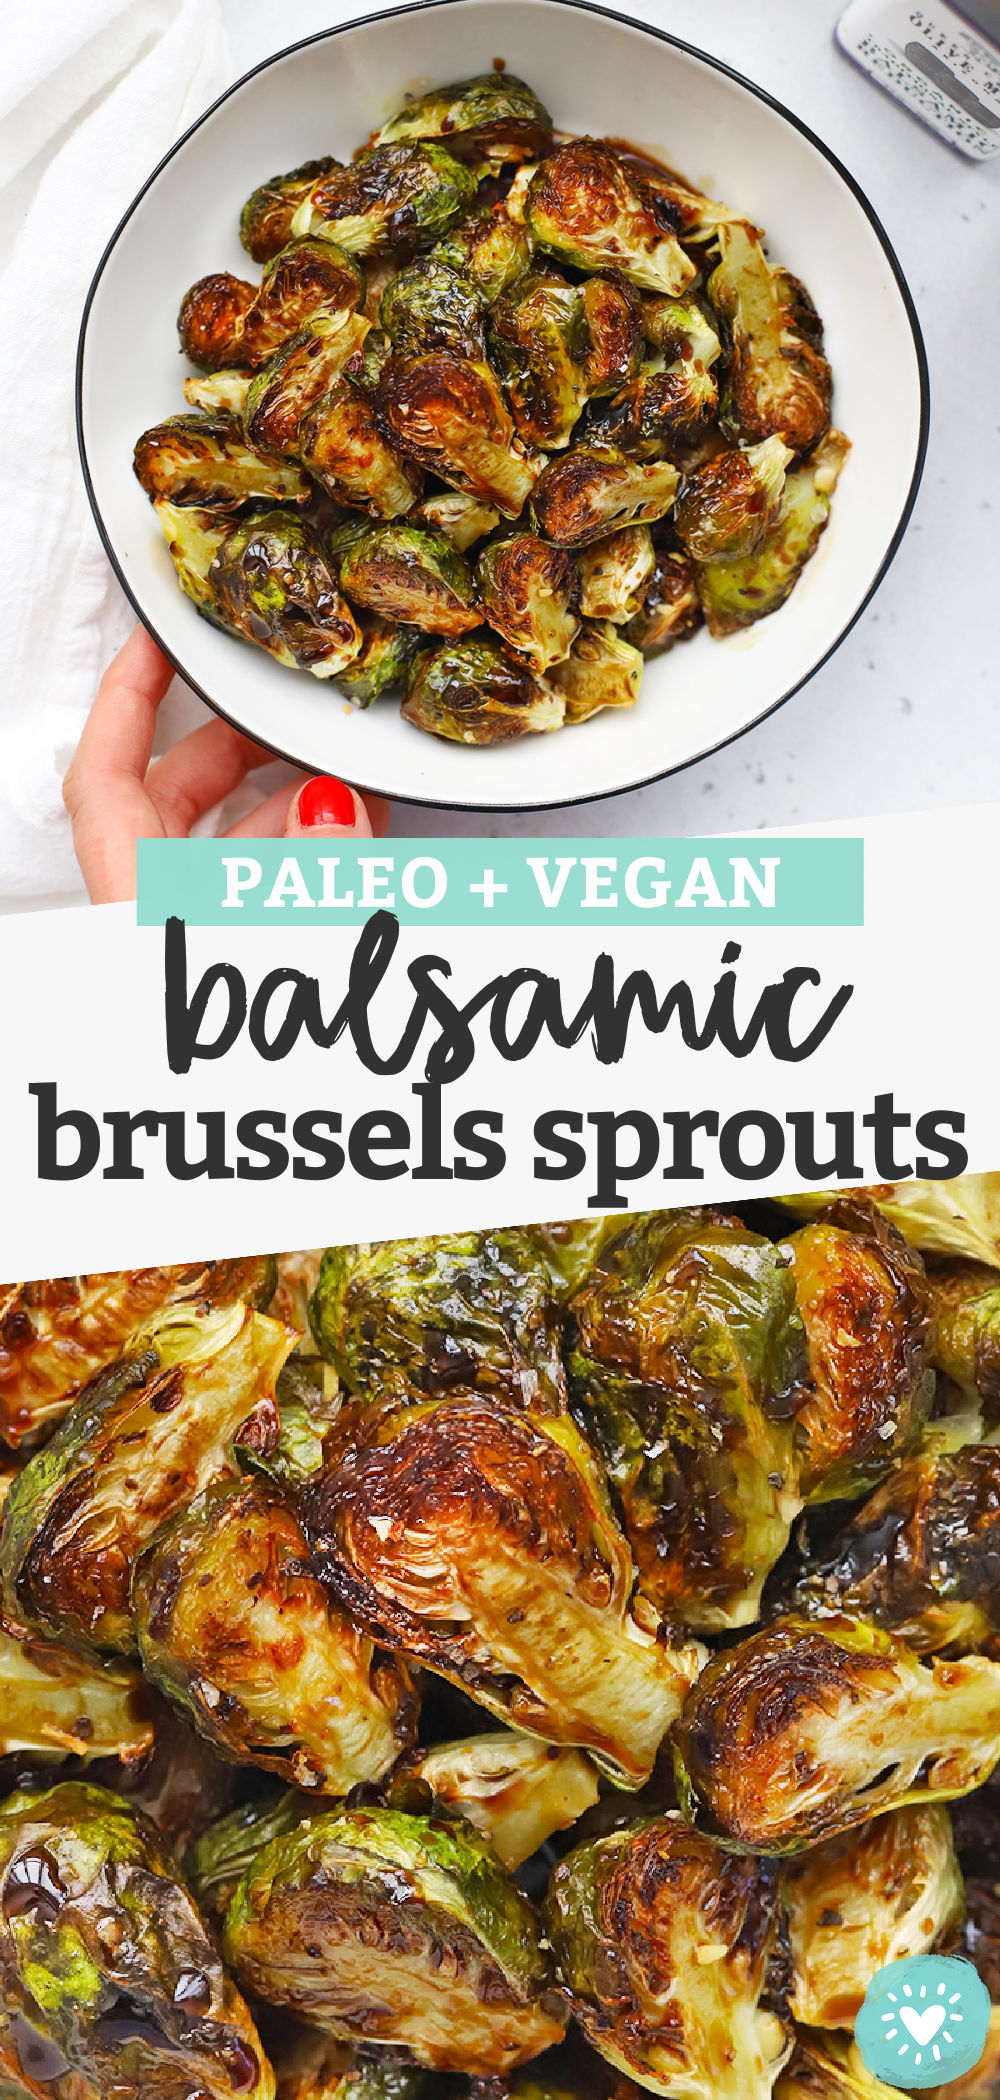 Balsamic Brussels Sprouts - Crispy roasted balsamic Brussels Sprouts with balsamic glaze make a delicious side dish you'll come back to again and again. (Paleo, Vegan) // Maple Balsamic Brussels Sprouts // Roasted Brussels Sprouts recipe // Thanksgiving side dish #paleo #vegan #brusselssprouts #sidedish #thanksgiving